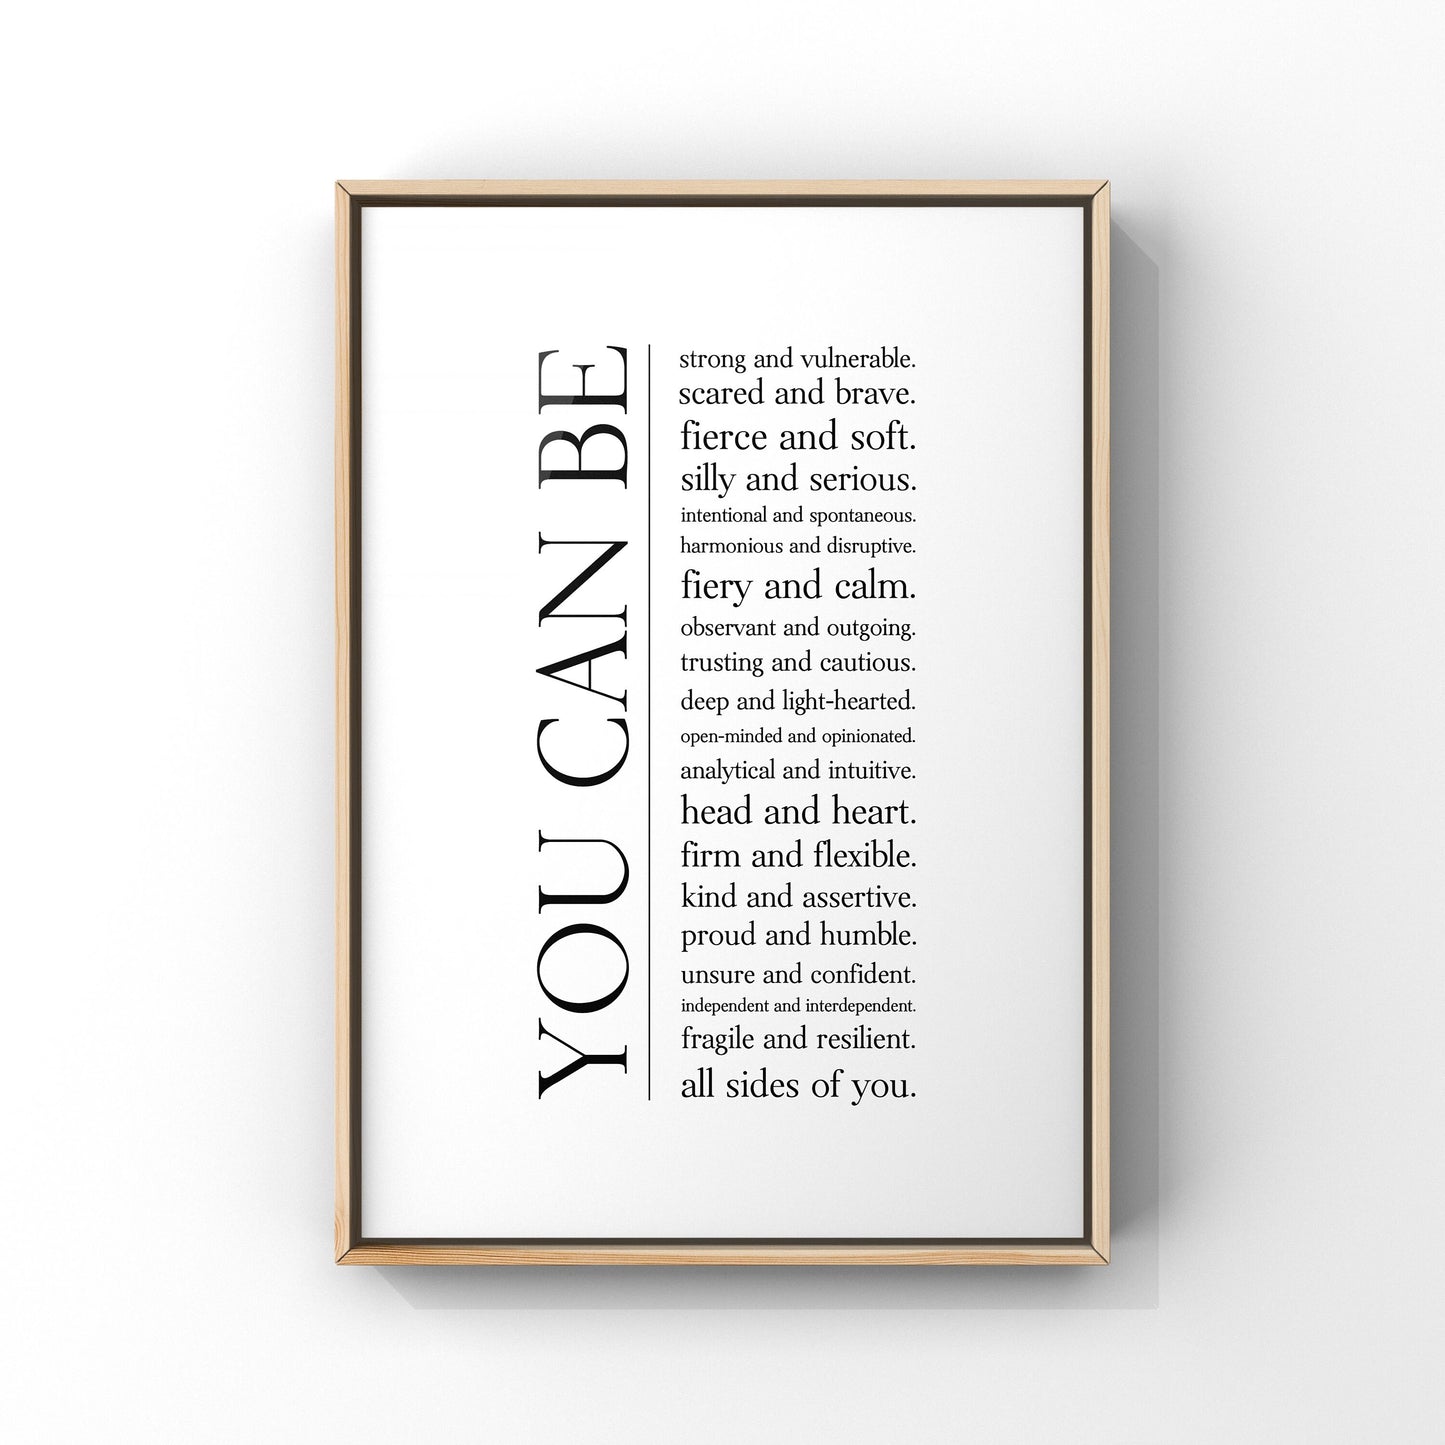 You can be all sides of you,Inspirational wall art,Motivational quote print,Positive quote,Wall art,Encouragement gift,Mindset,Self-growth